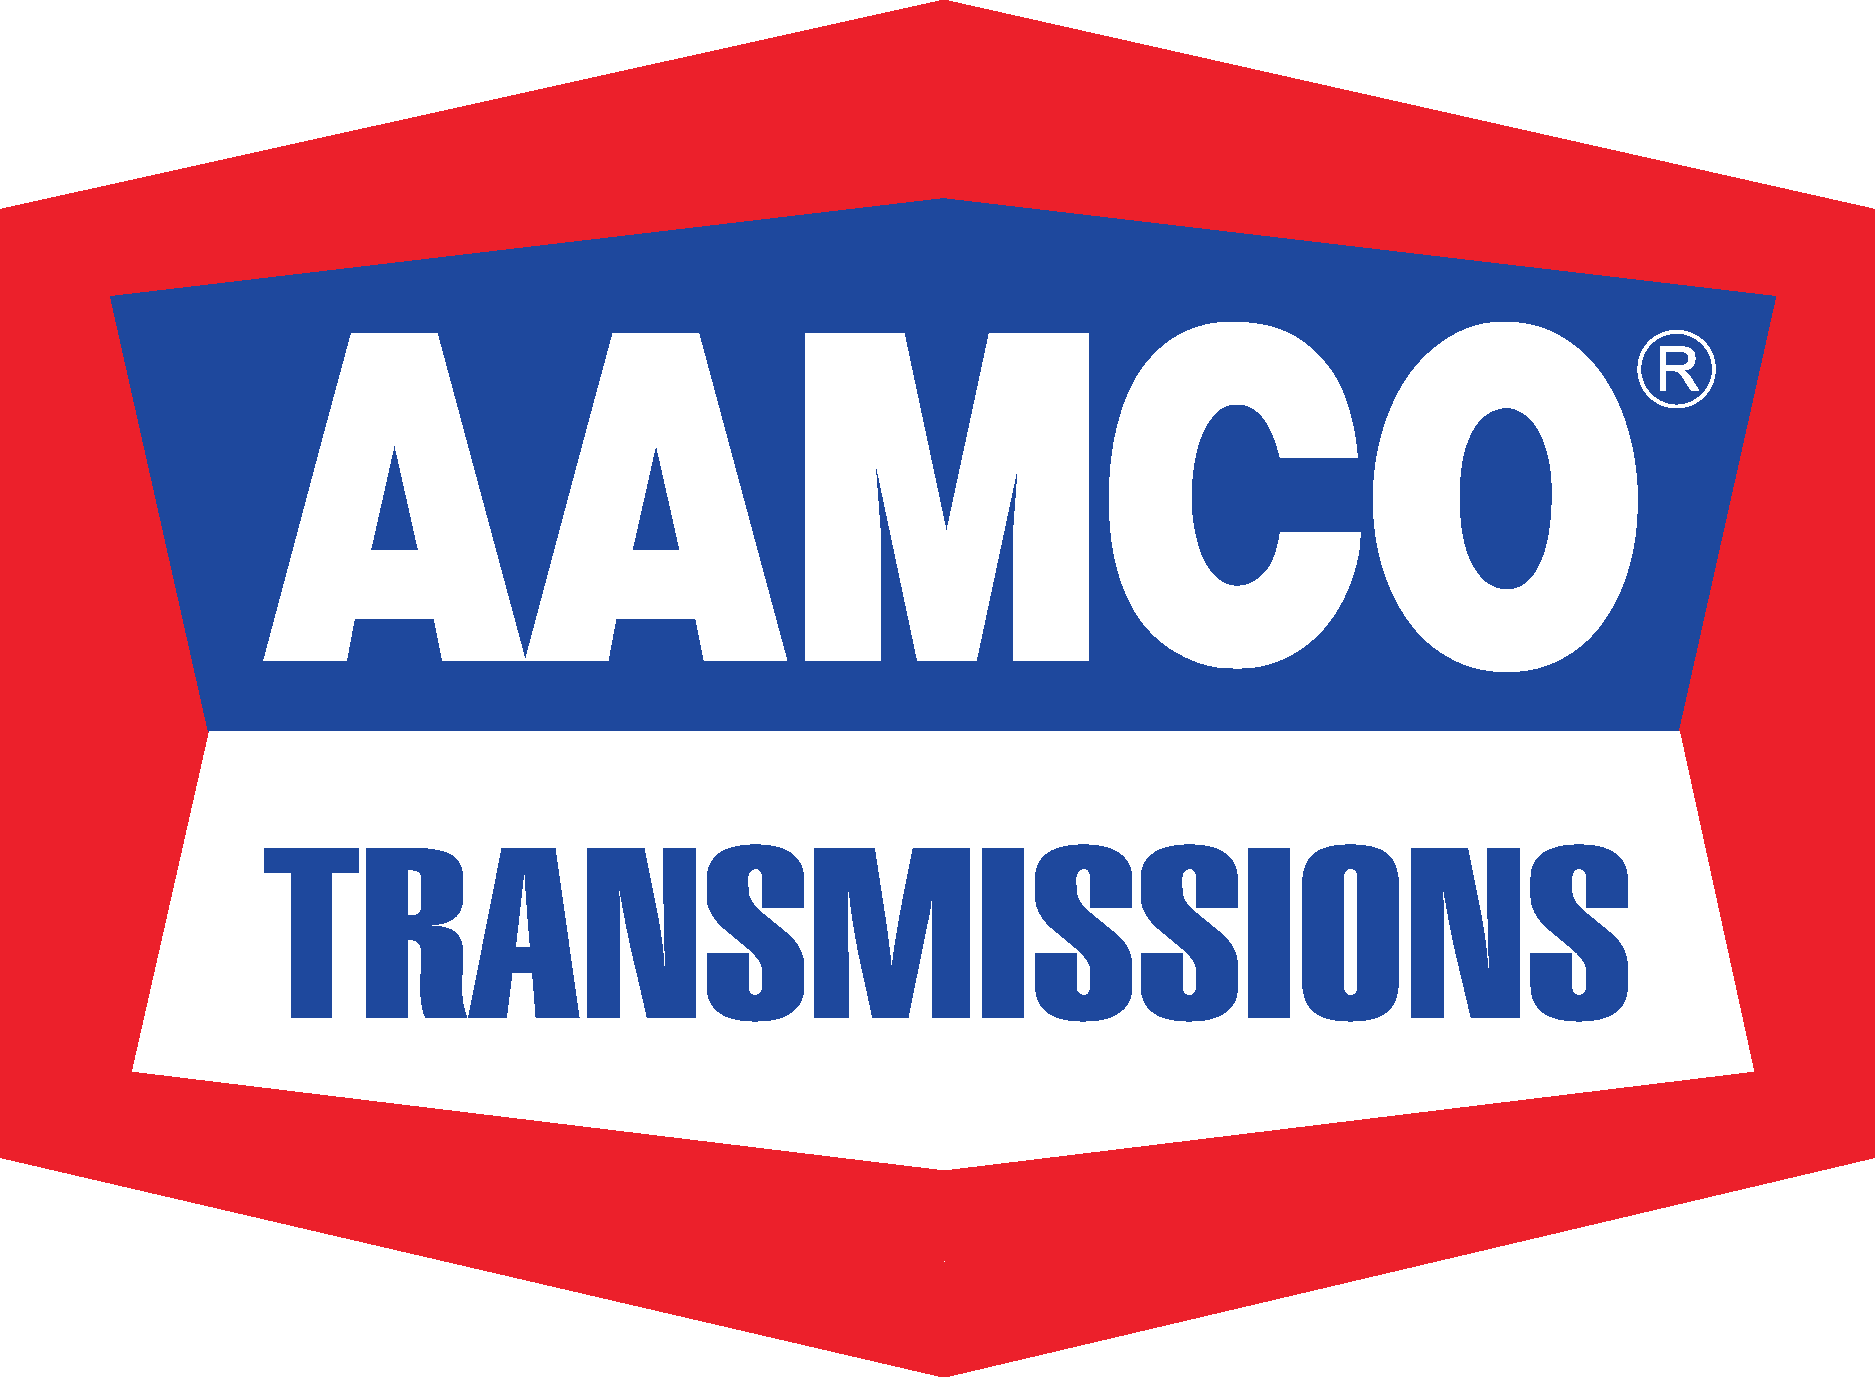 Aamco Transmissions Logo Vector